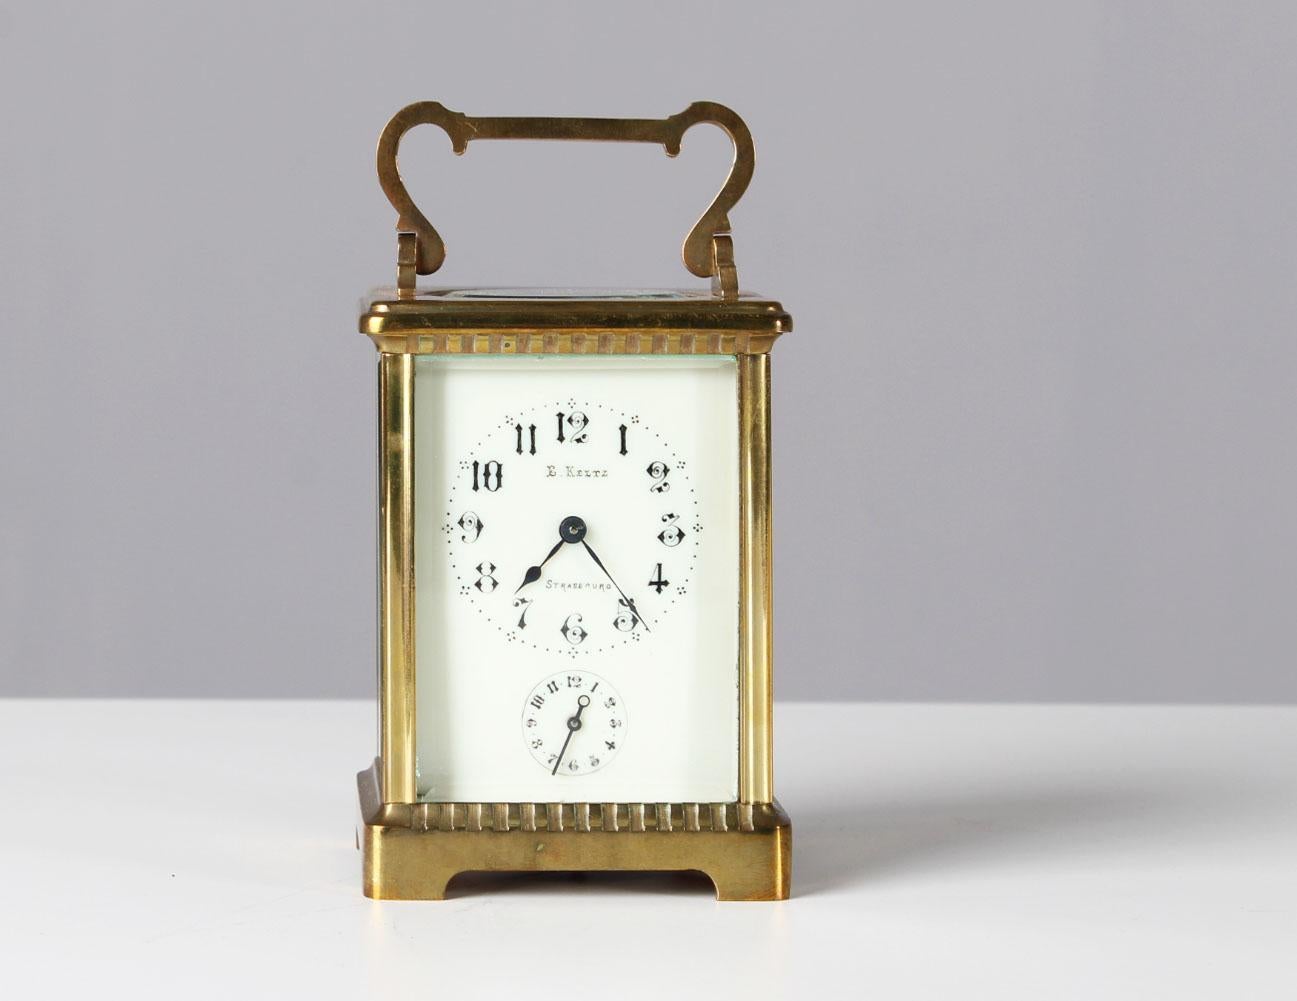 Antique travel clock with alarm function. 
H x W x D: approx 12 x 8 x 6 cm.

Brass case glazed on all sides. Dial with signature: E. Keltz Strasbourg.

Eight-day movement. With old key. 

Running condition. Brass with authentic patina. Easy